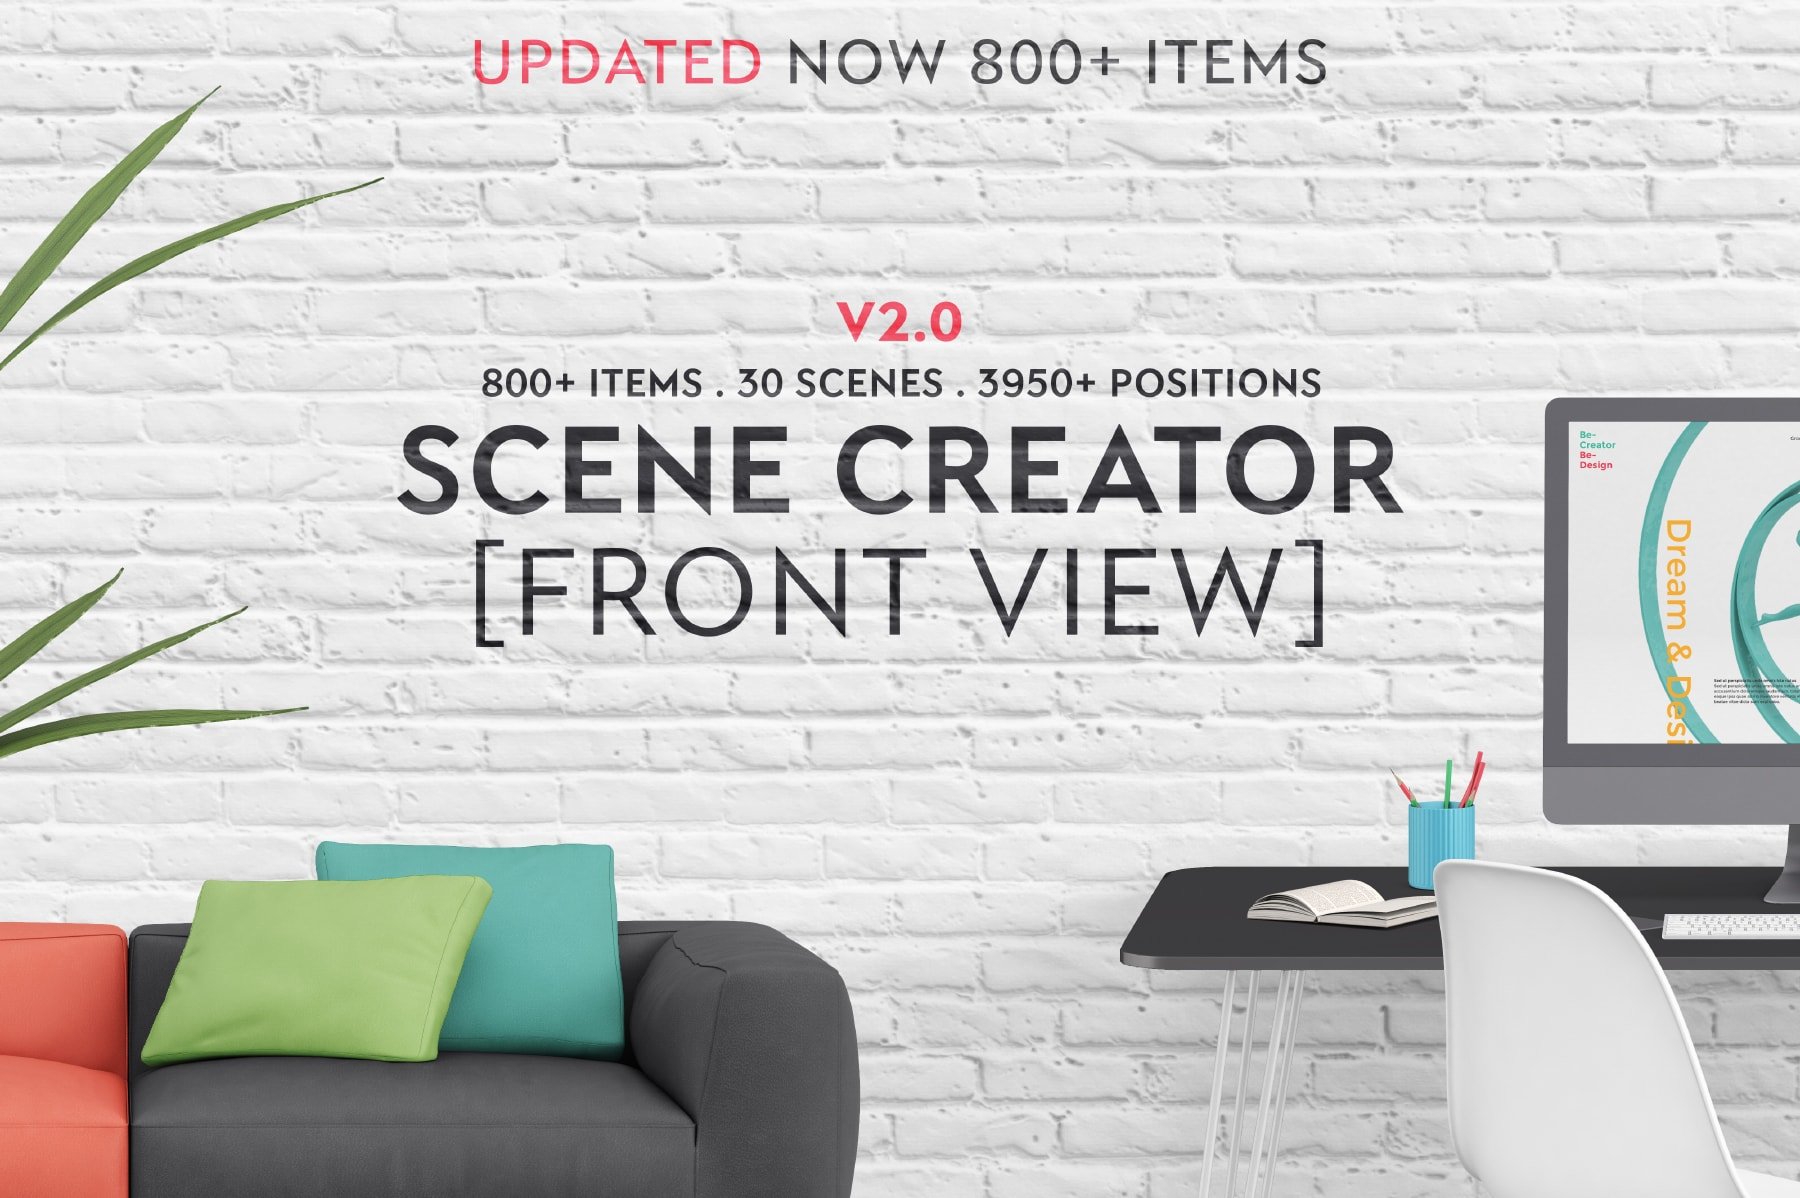 Scene Creator [Front View] cover image.